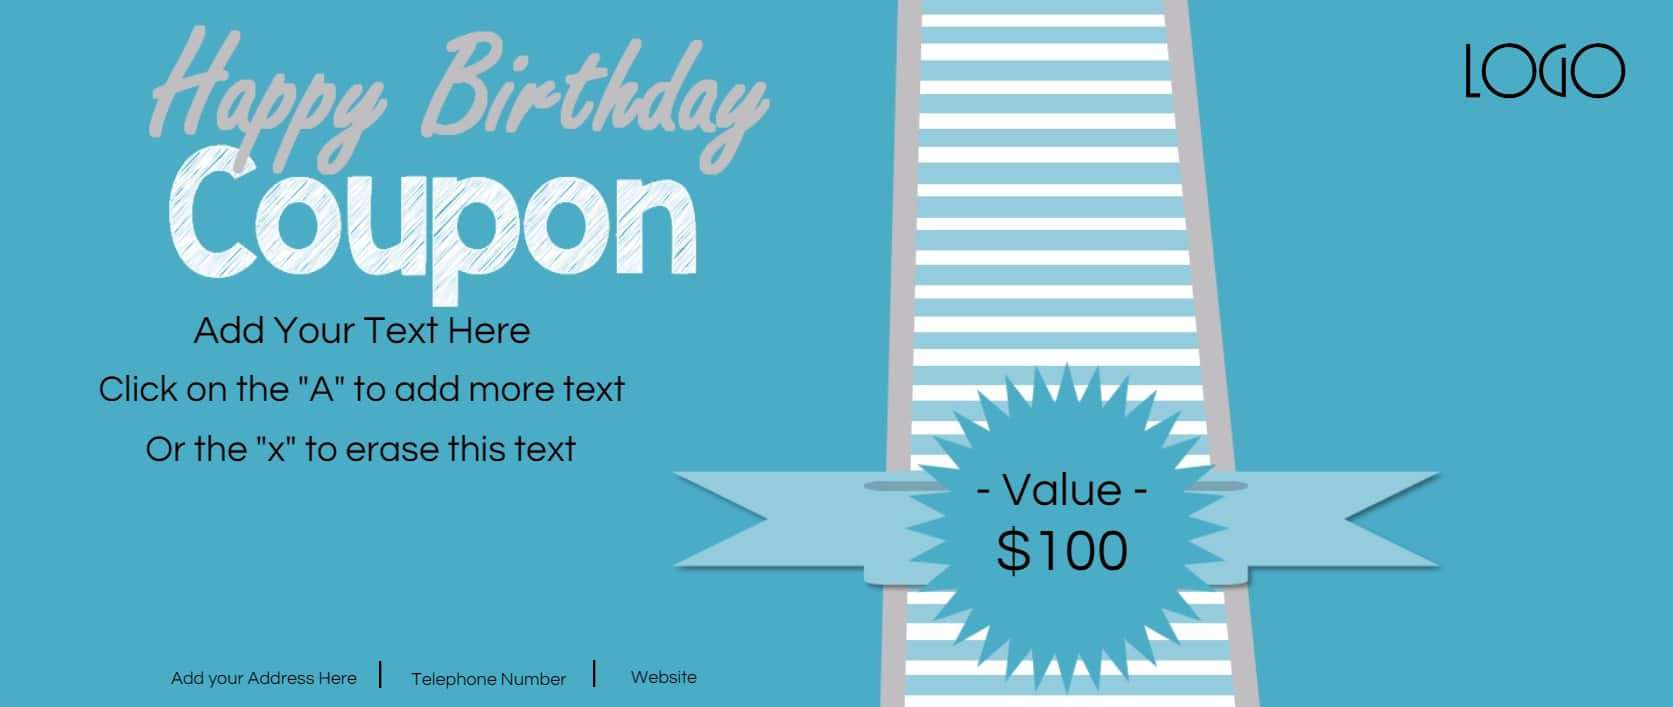 Free Custom Birthday Coupons - Customize Online & Print at 